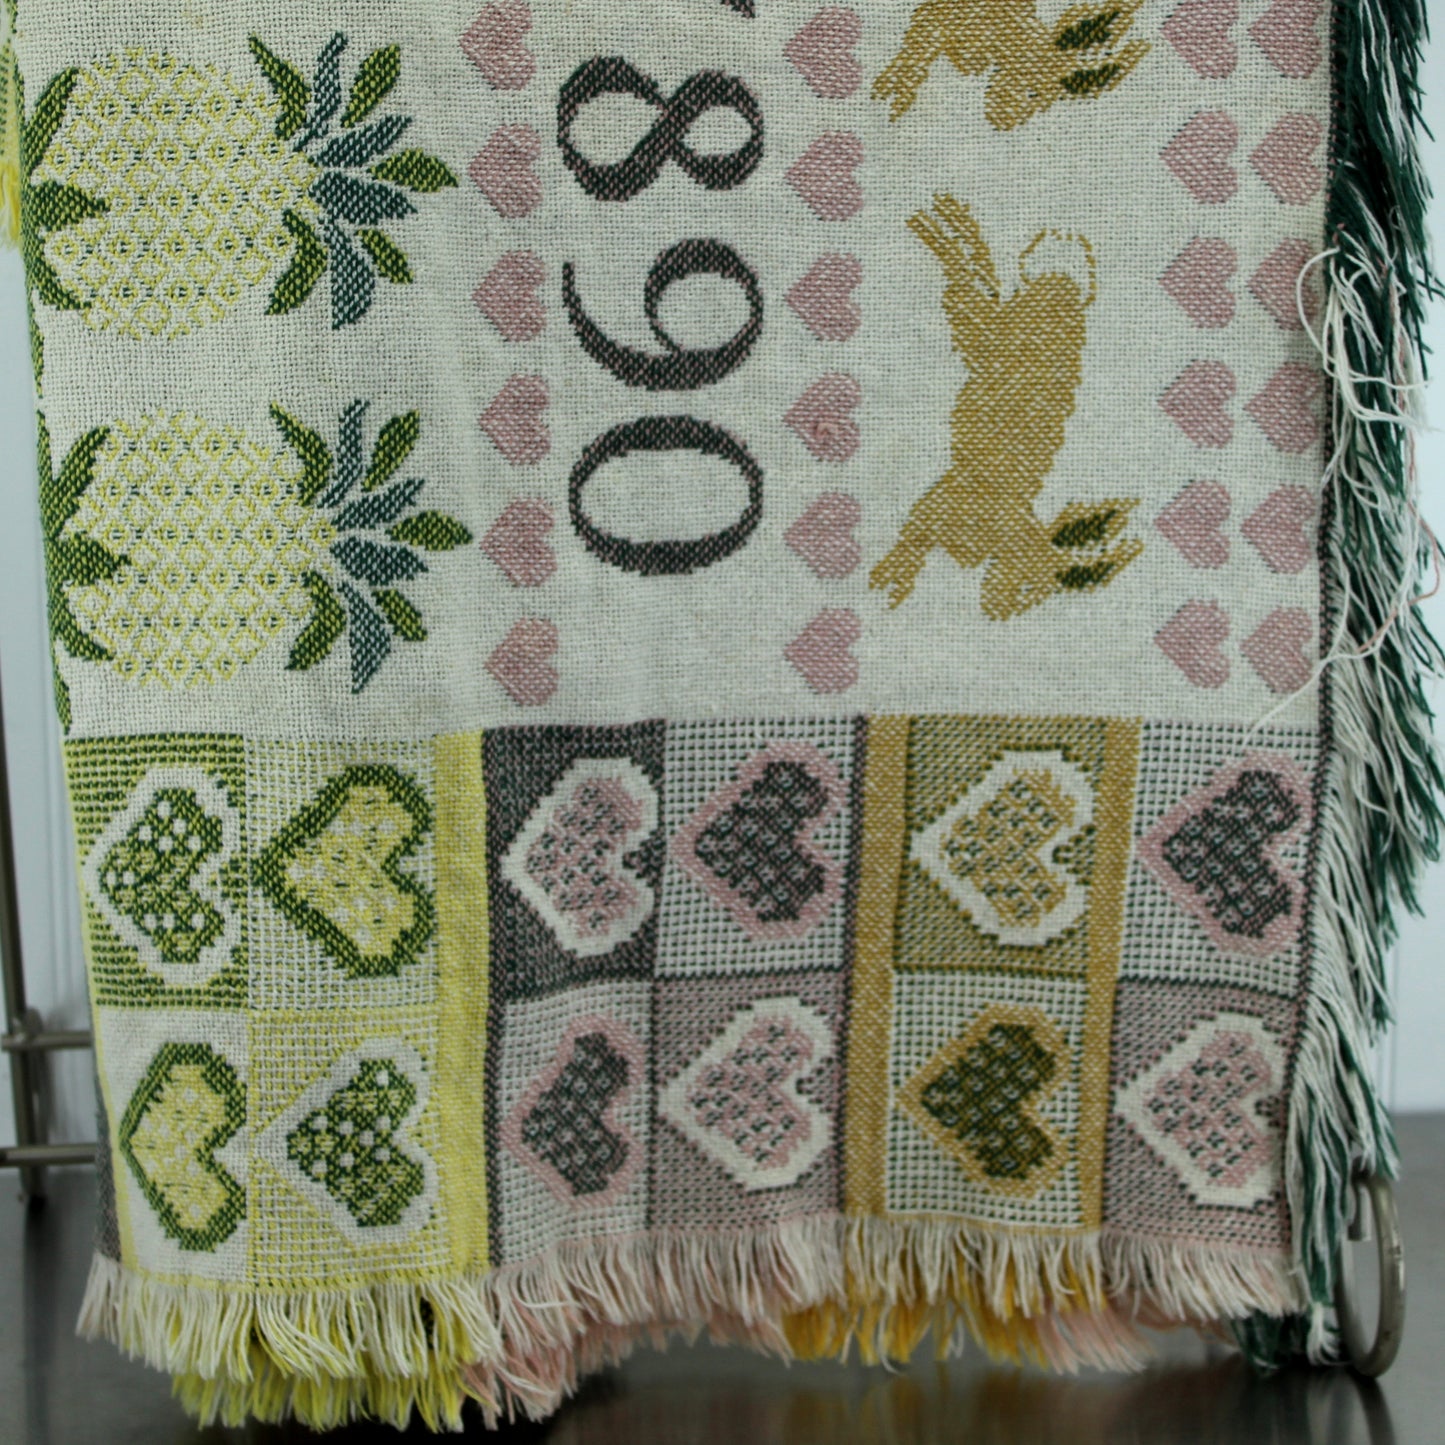 All Cotton Throw Blanket Schoolhouse Alphabet Hearts White Pastels Green nicely used